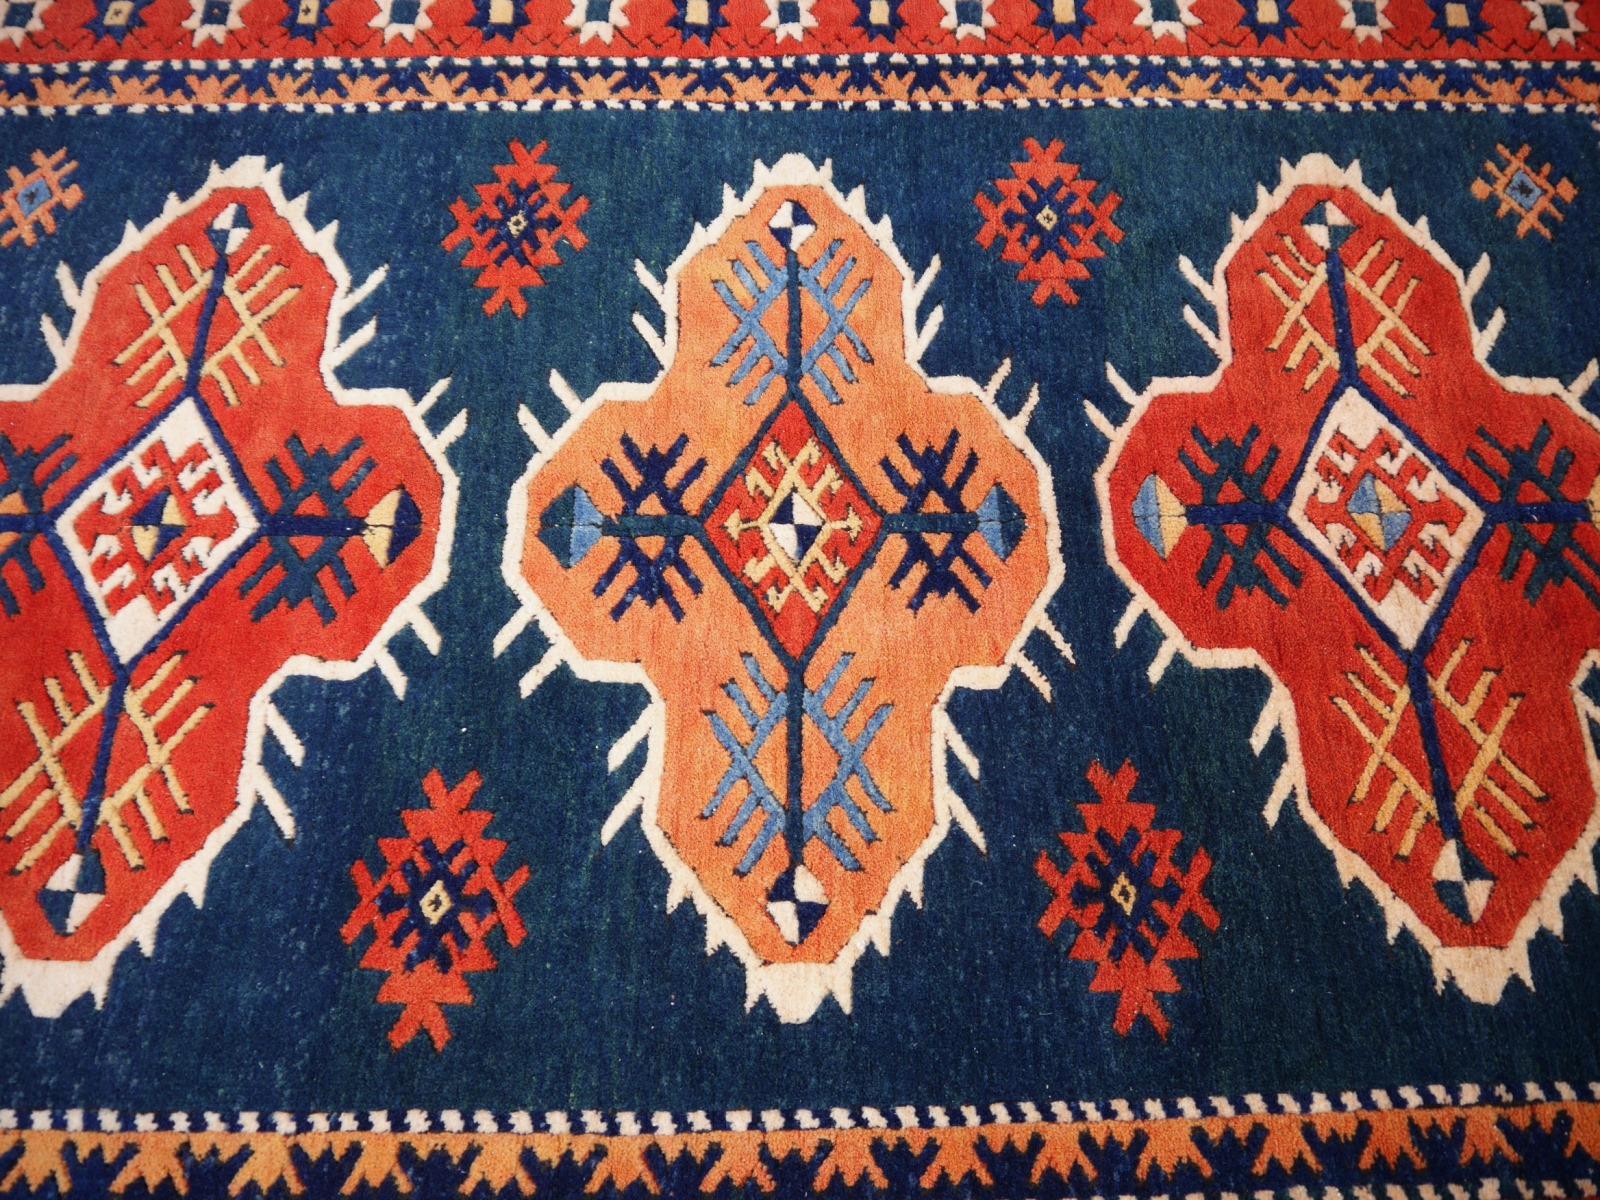 Stunning Turkish Azeri rug vintage with Caucasian and Heriz Design - Djoharian Collection

Turkish rugs and carpets are mainly made of fine, hand-spun wool, 
This wonderful and stunning example comes from Eastern Anatolia.

This rug was made